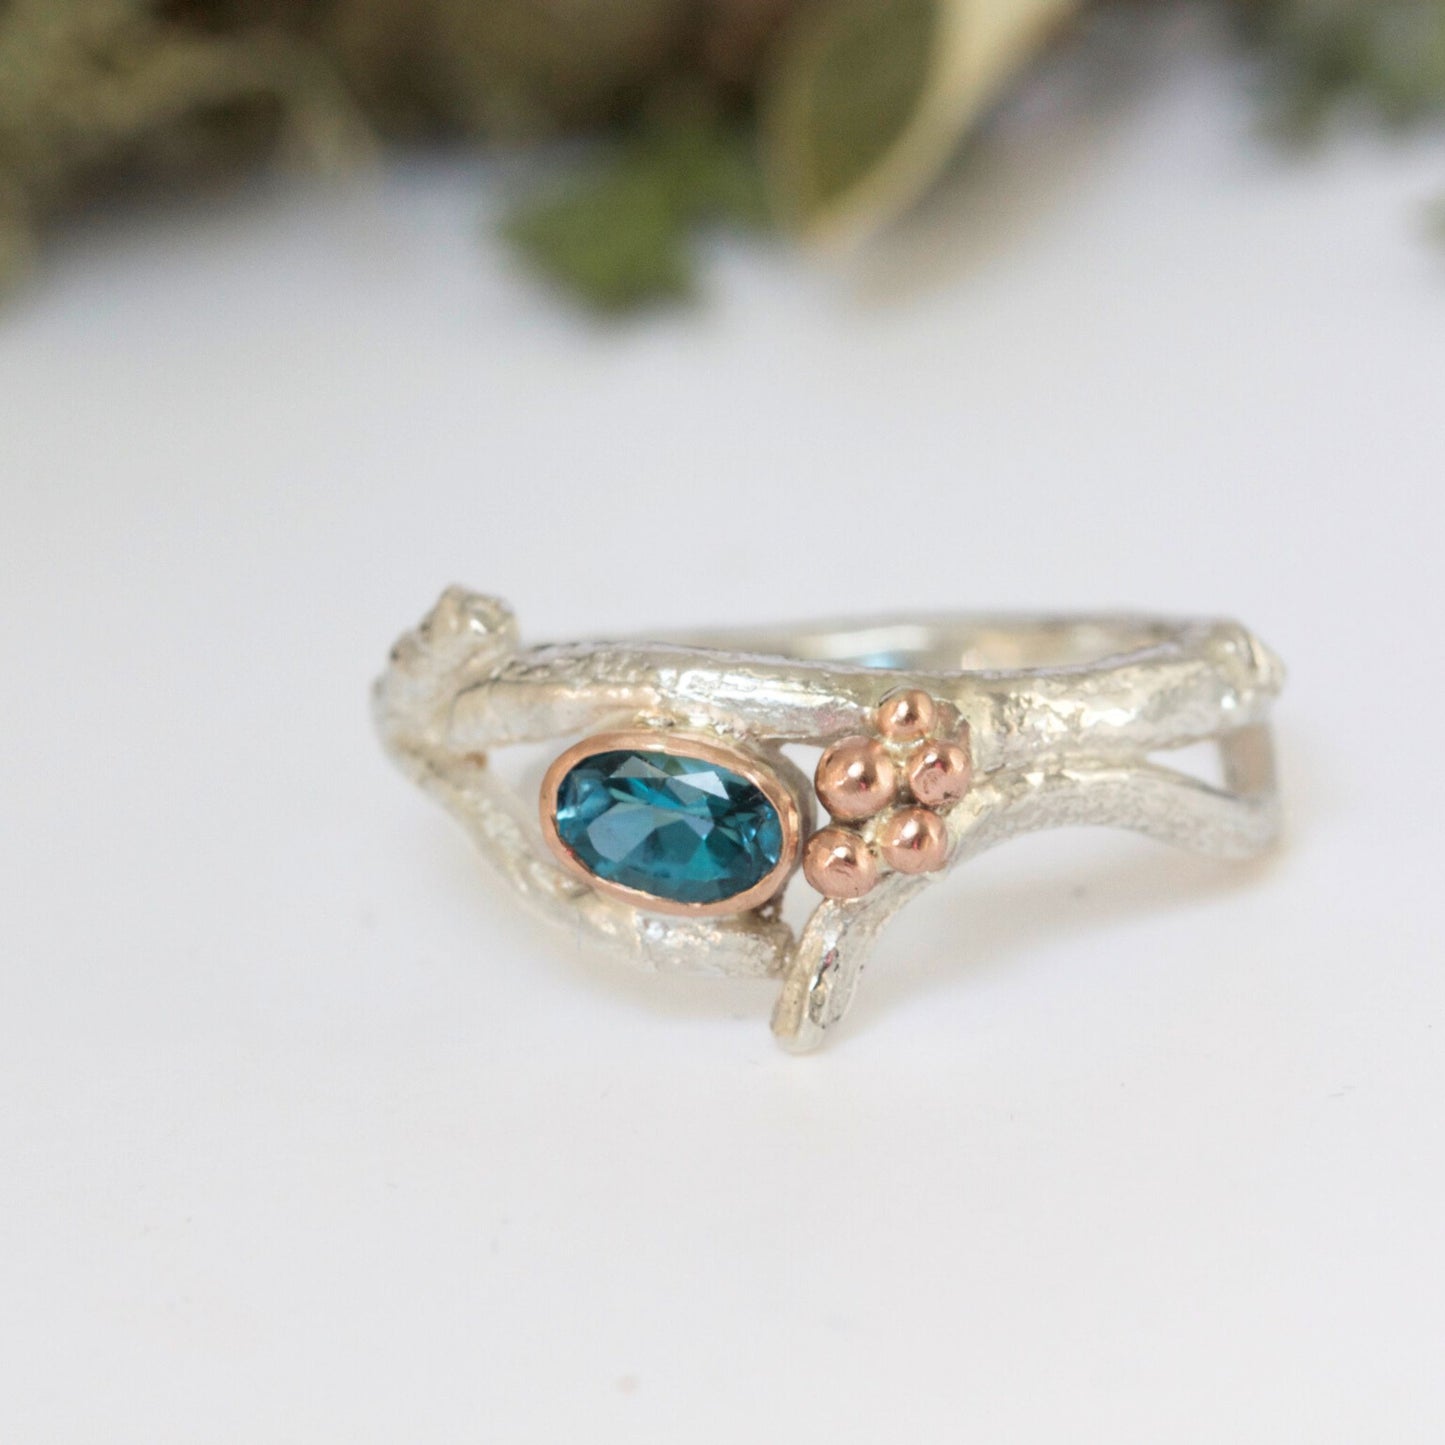 Silver and Rose Gold Twig Ring, Woodland Ring, London Blue Topaz Ring